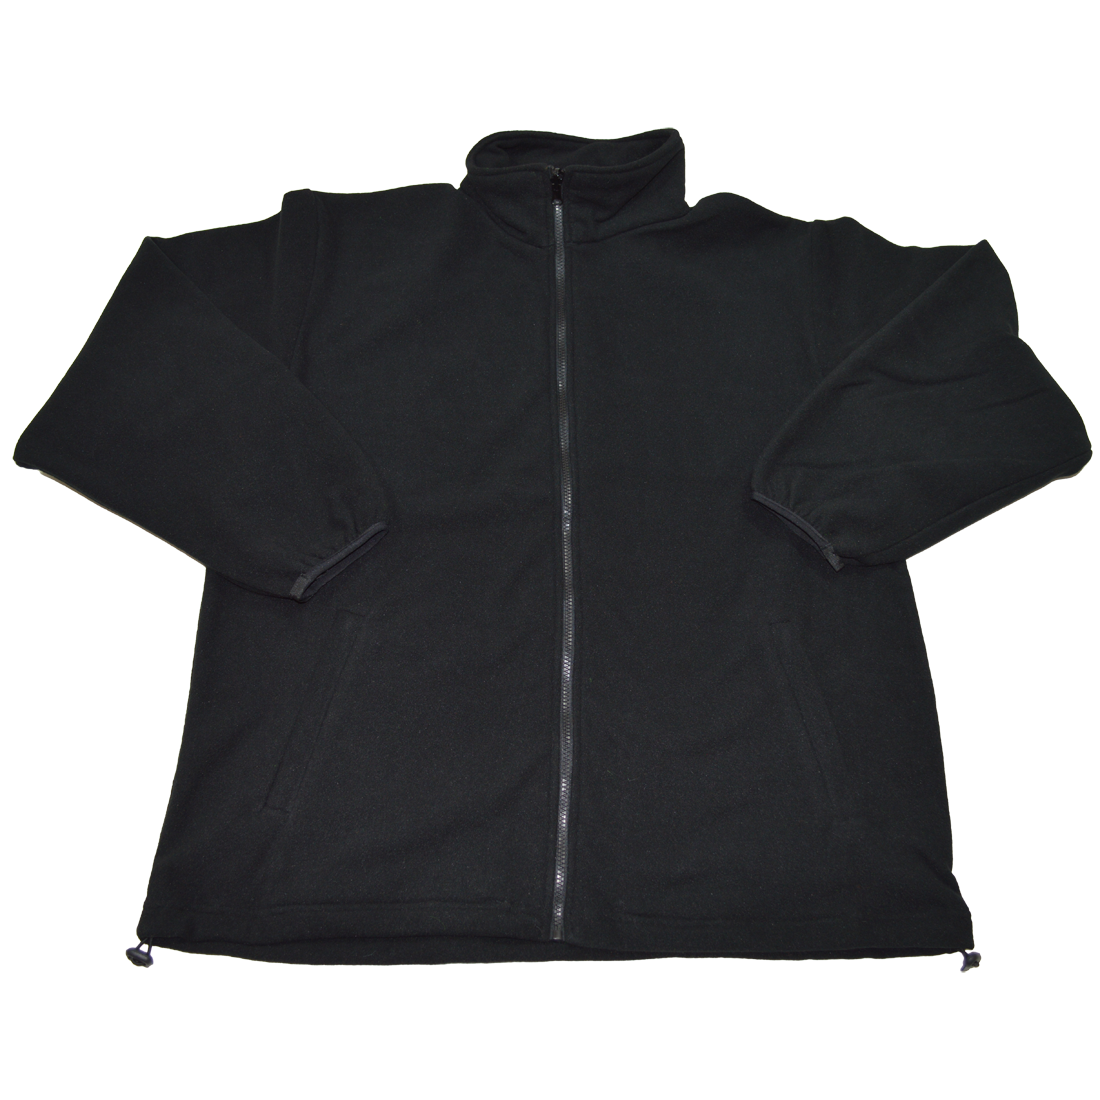 Petra Roc LBPJ3IN1-C3 ANSI Class 3 Waterproof 3-in-1 Thermal Jacket ...